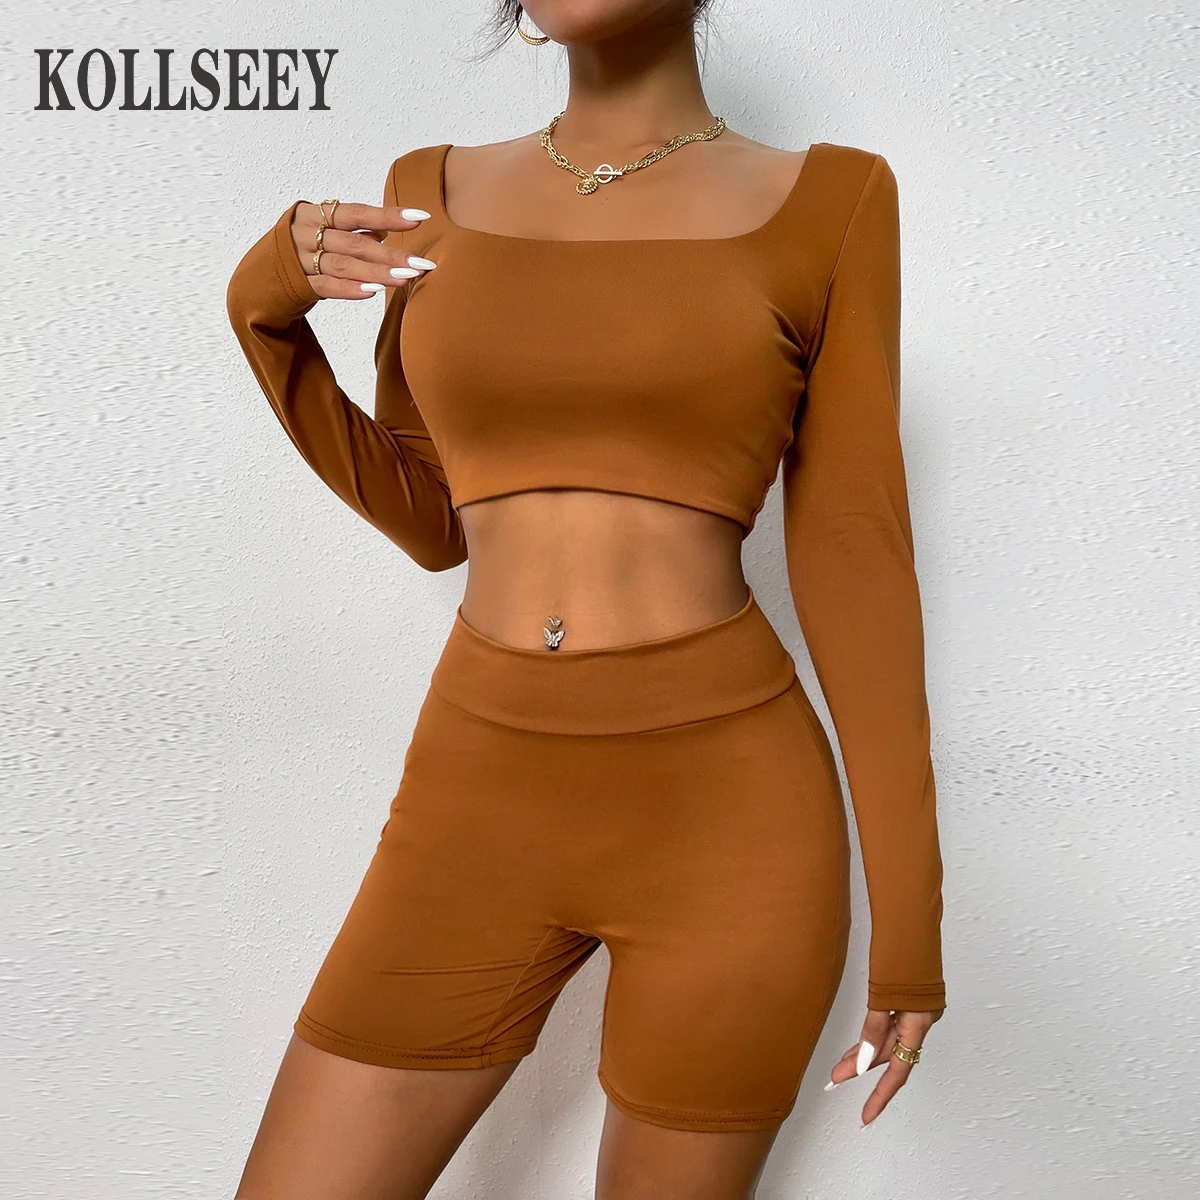 KOLLSEEY Brand Two Piece dress Women Outfits Strap Crop Top and Skirt  Party Skirt Sets enlarge